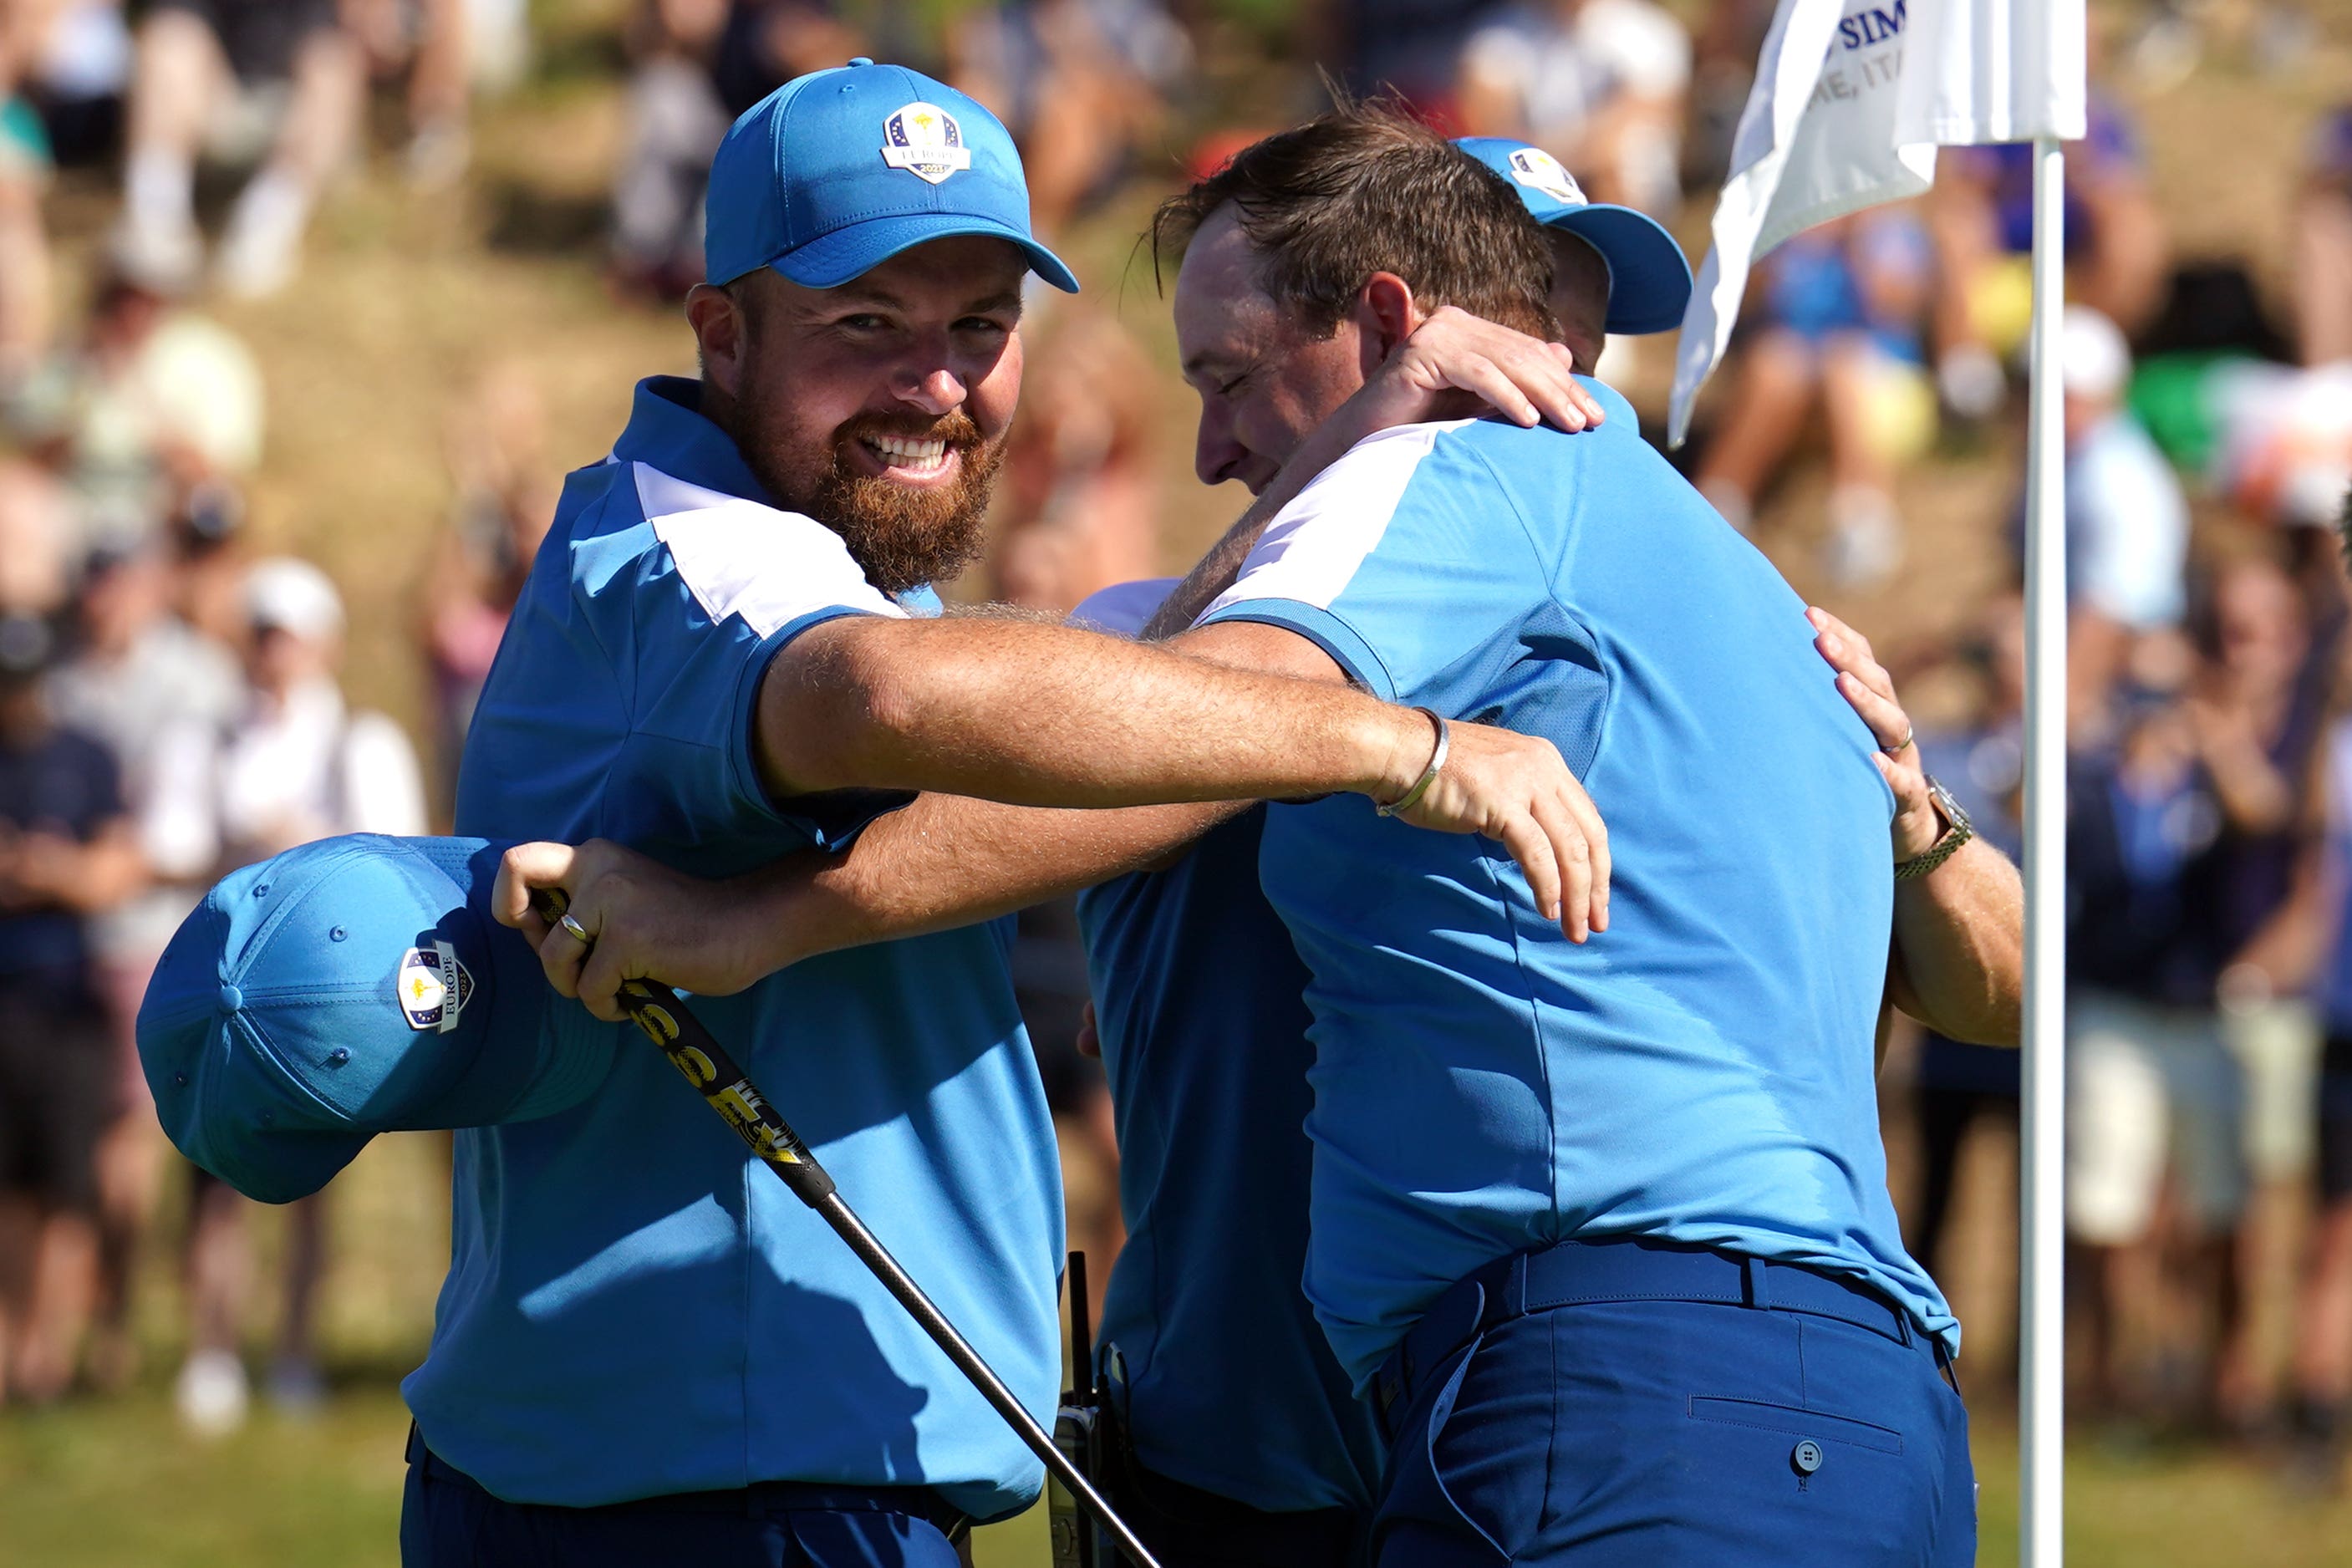 Shane Lowry lost it before even teeing off as Europe make dream start The Independent